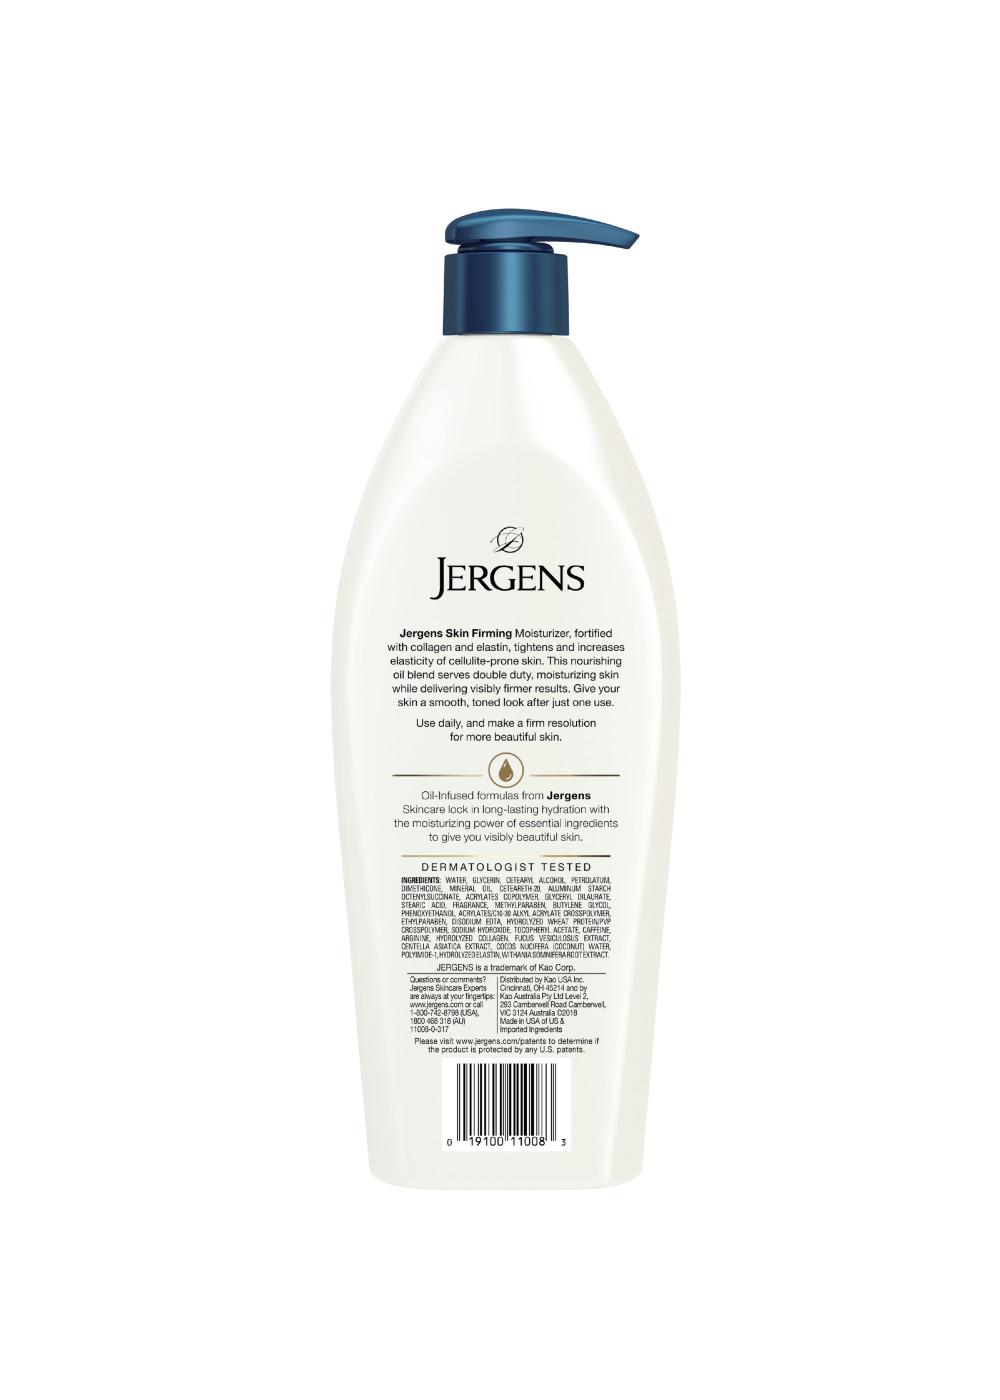 Jergens Skin Firming Body Lotion; image 3 of 8